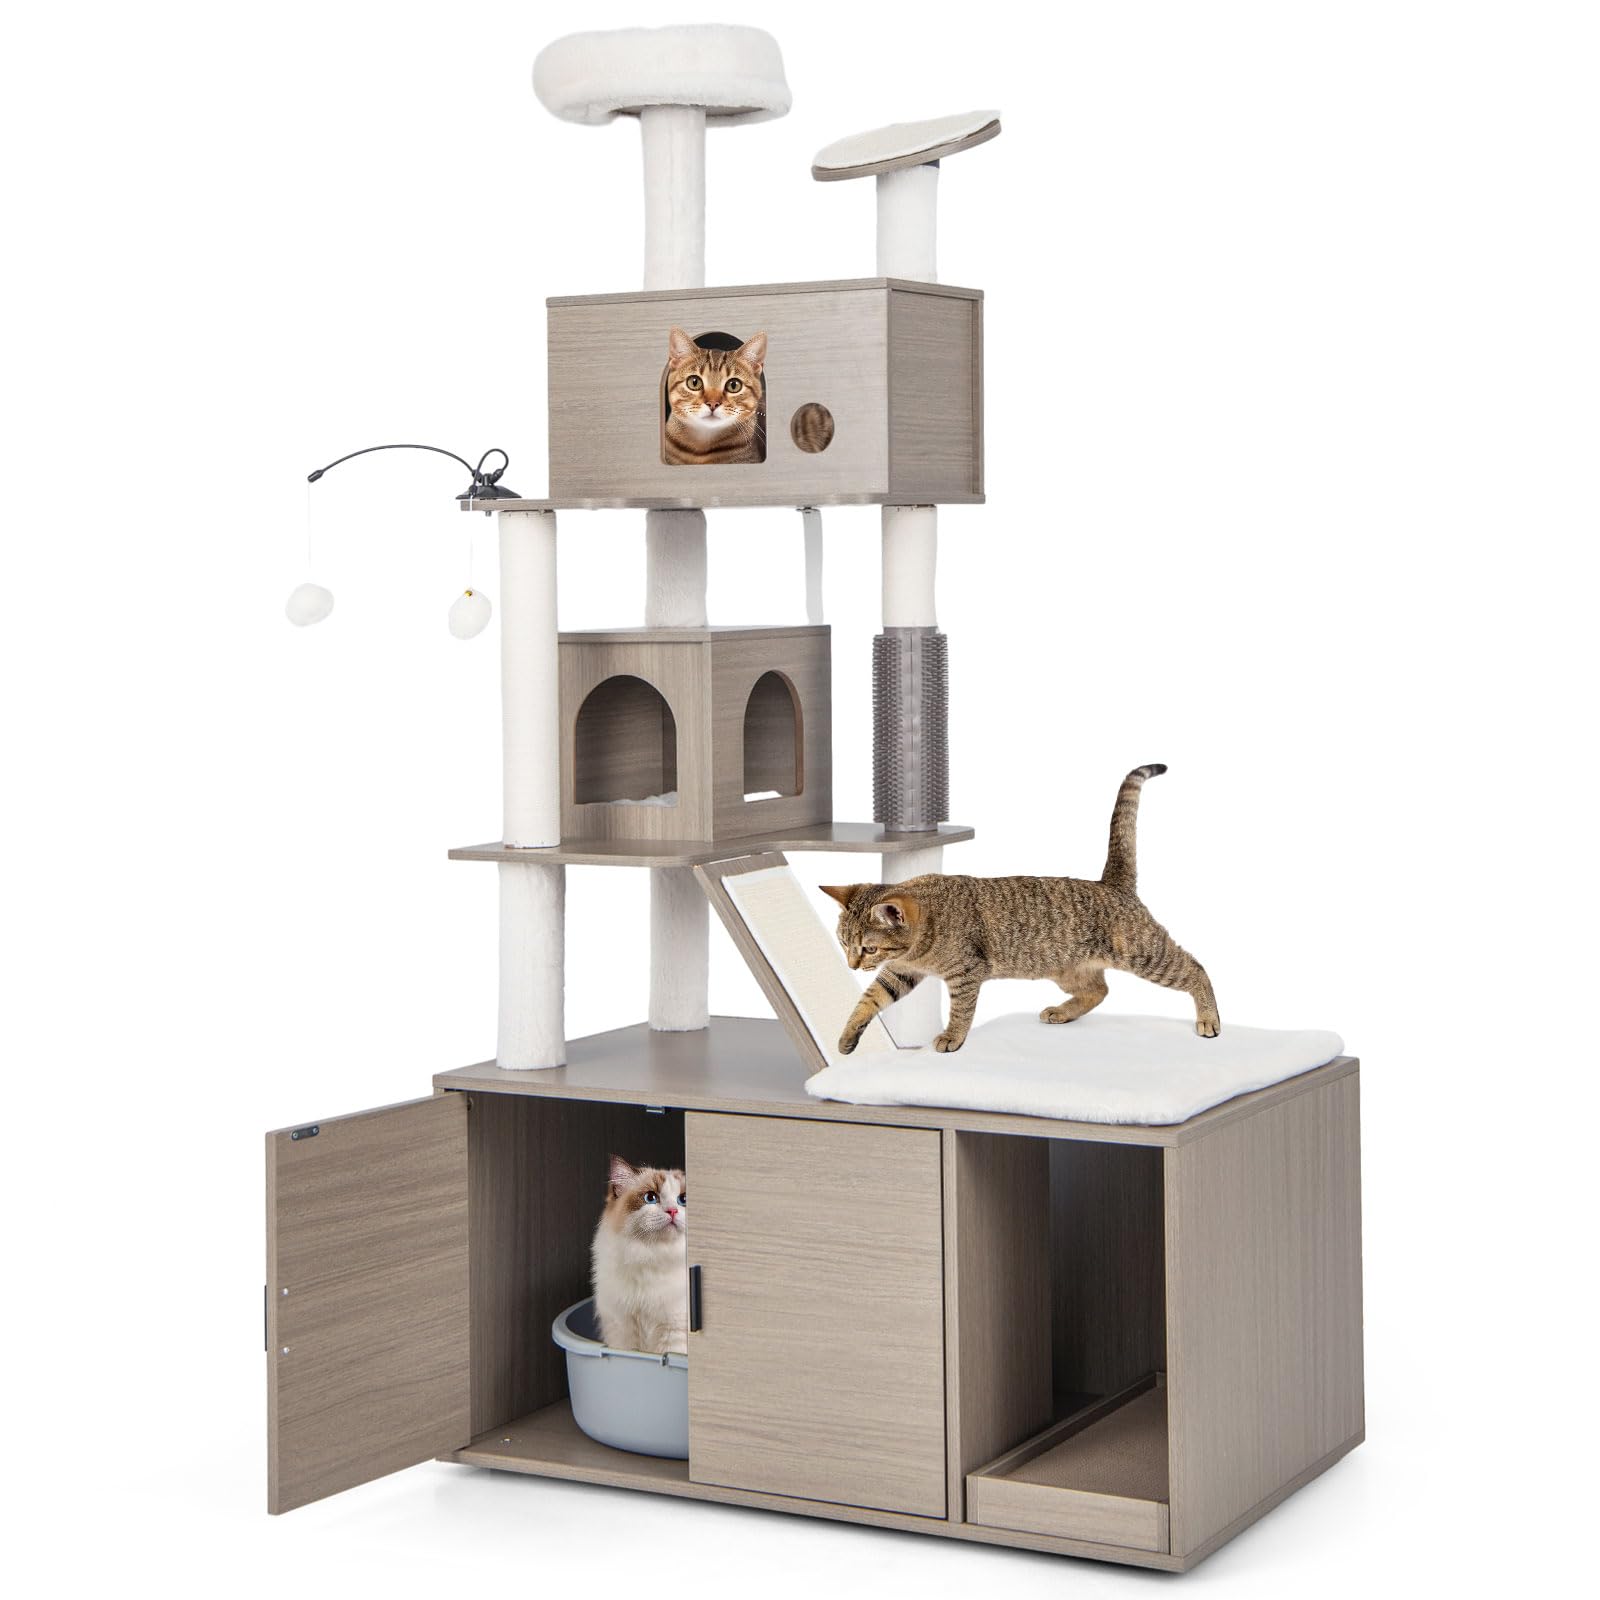 Tangkula Cat Tree with Litter Box Enclosure, Cat Tower with Litter Box, 2 Condos, Scratching Posts